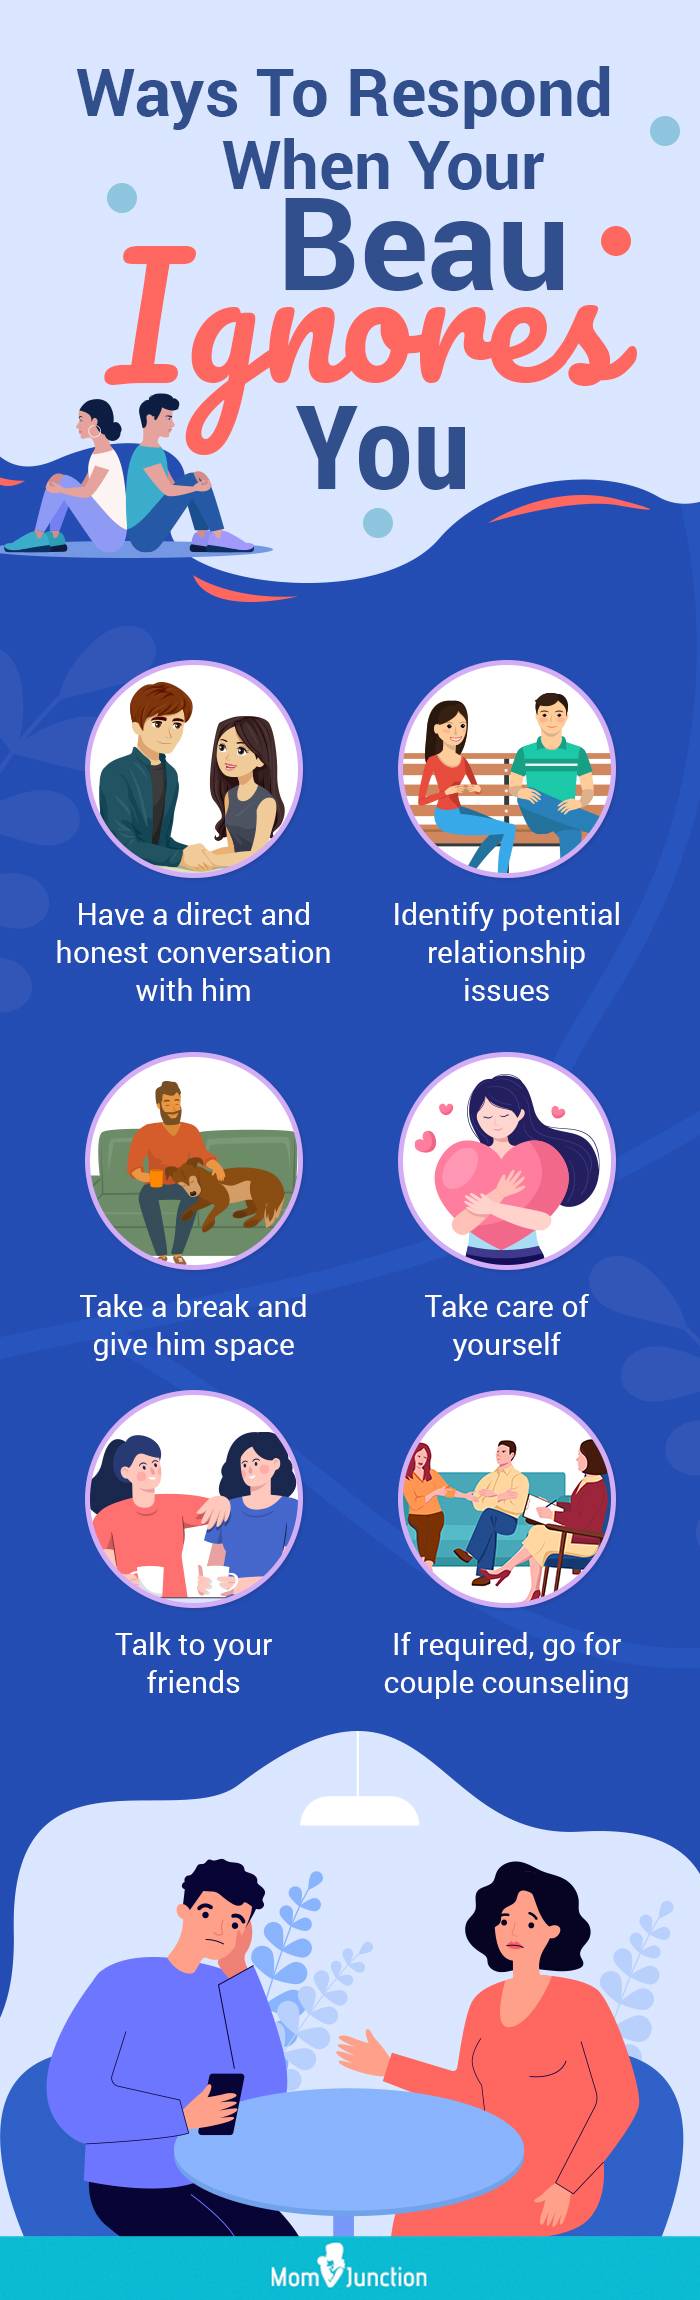 ways to respond when your beau ignores you (infographic)